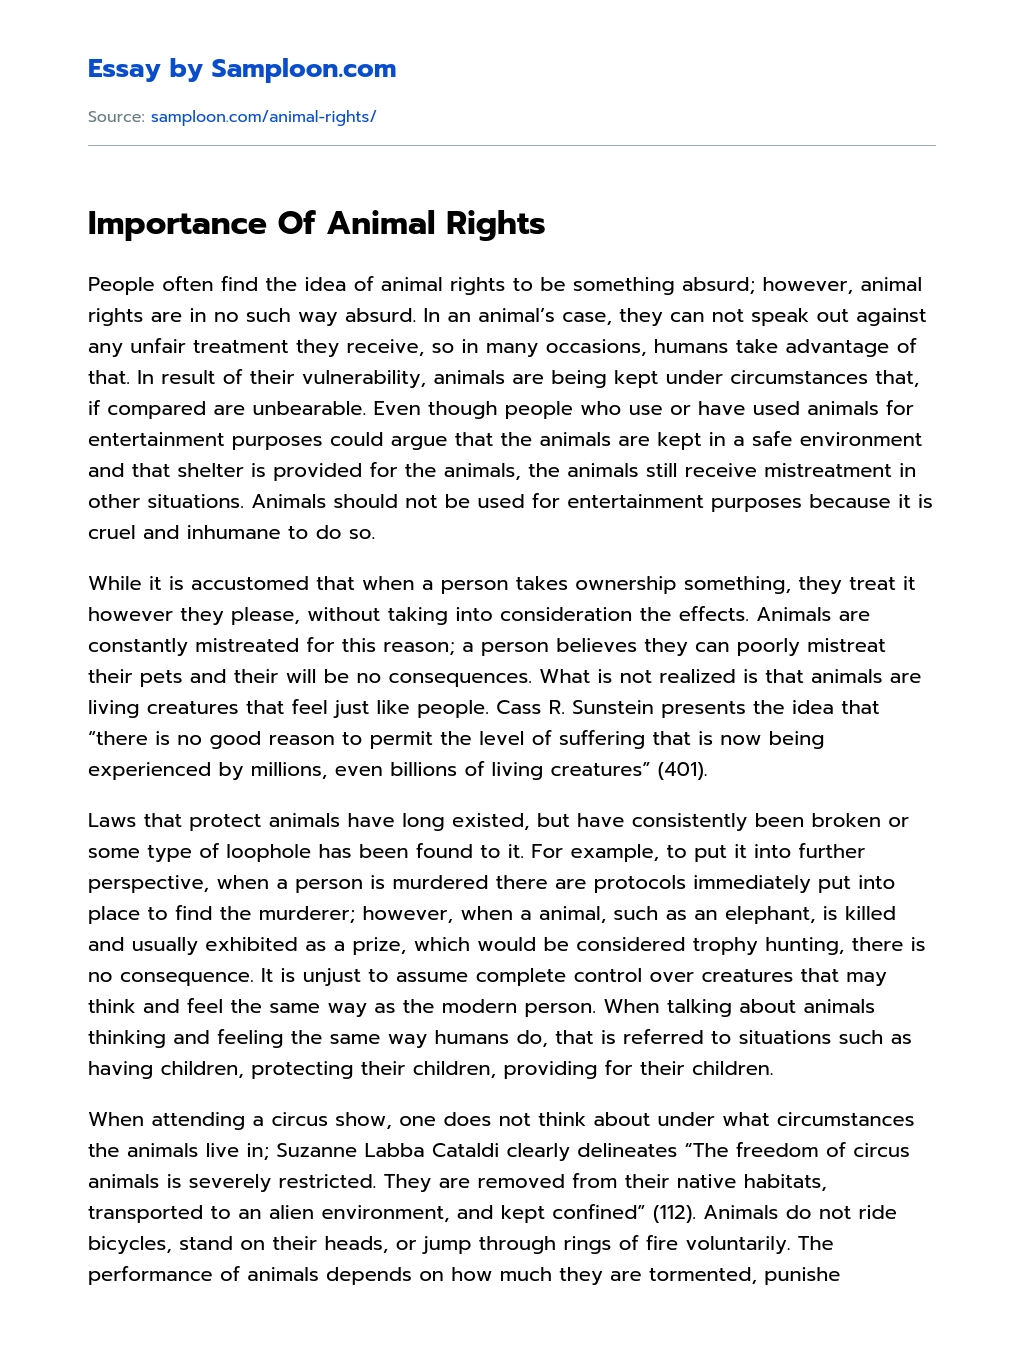 Importance Of Animal Rights Opinion Essay on 